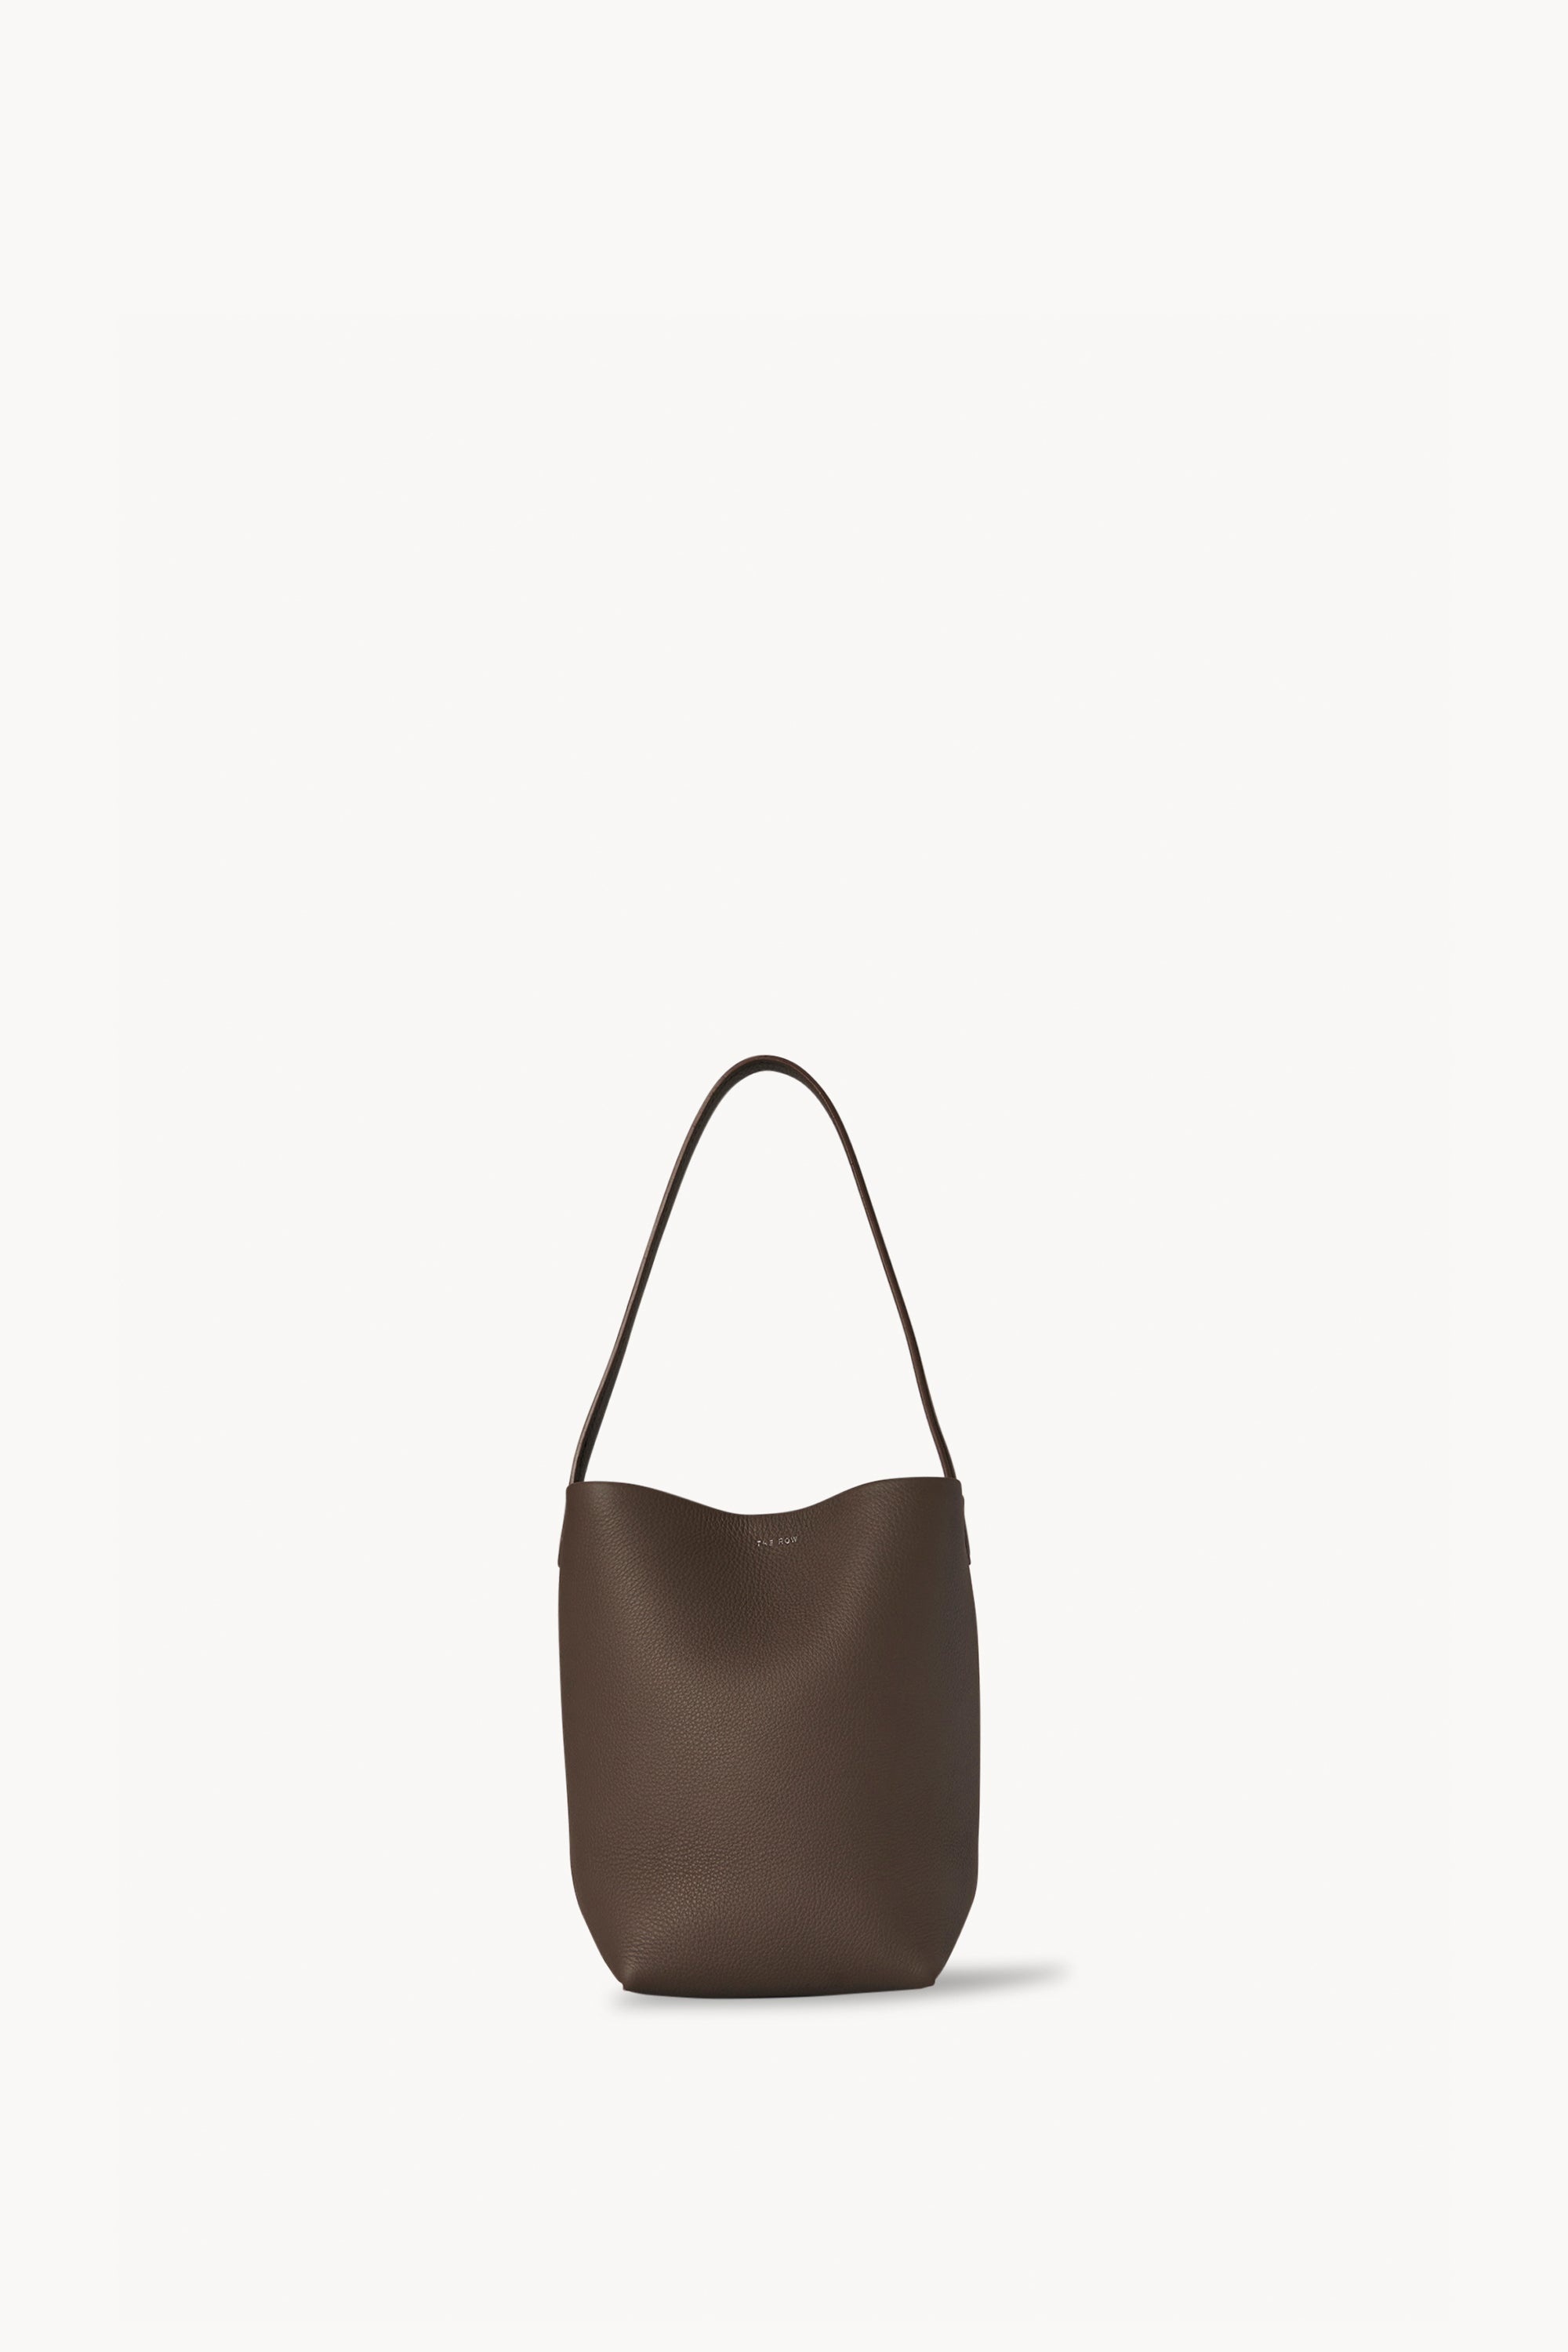 The Row Small N/S Park Tote in Leather